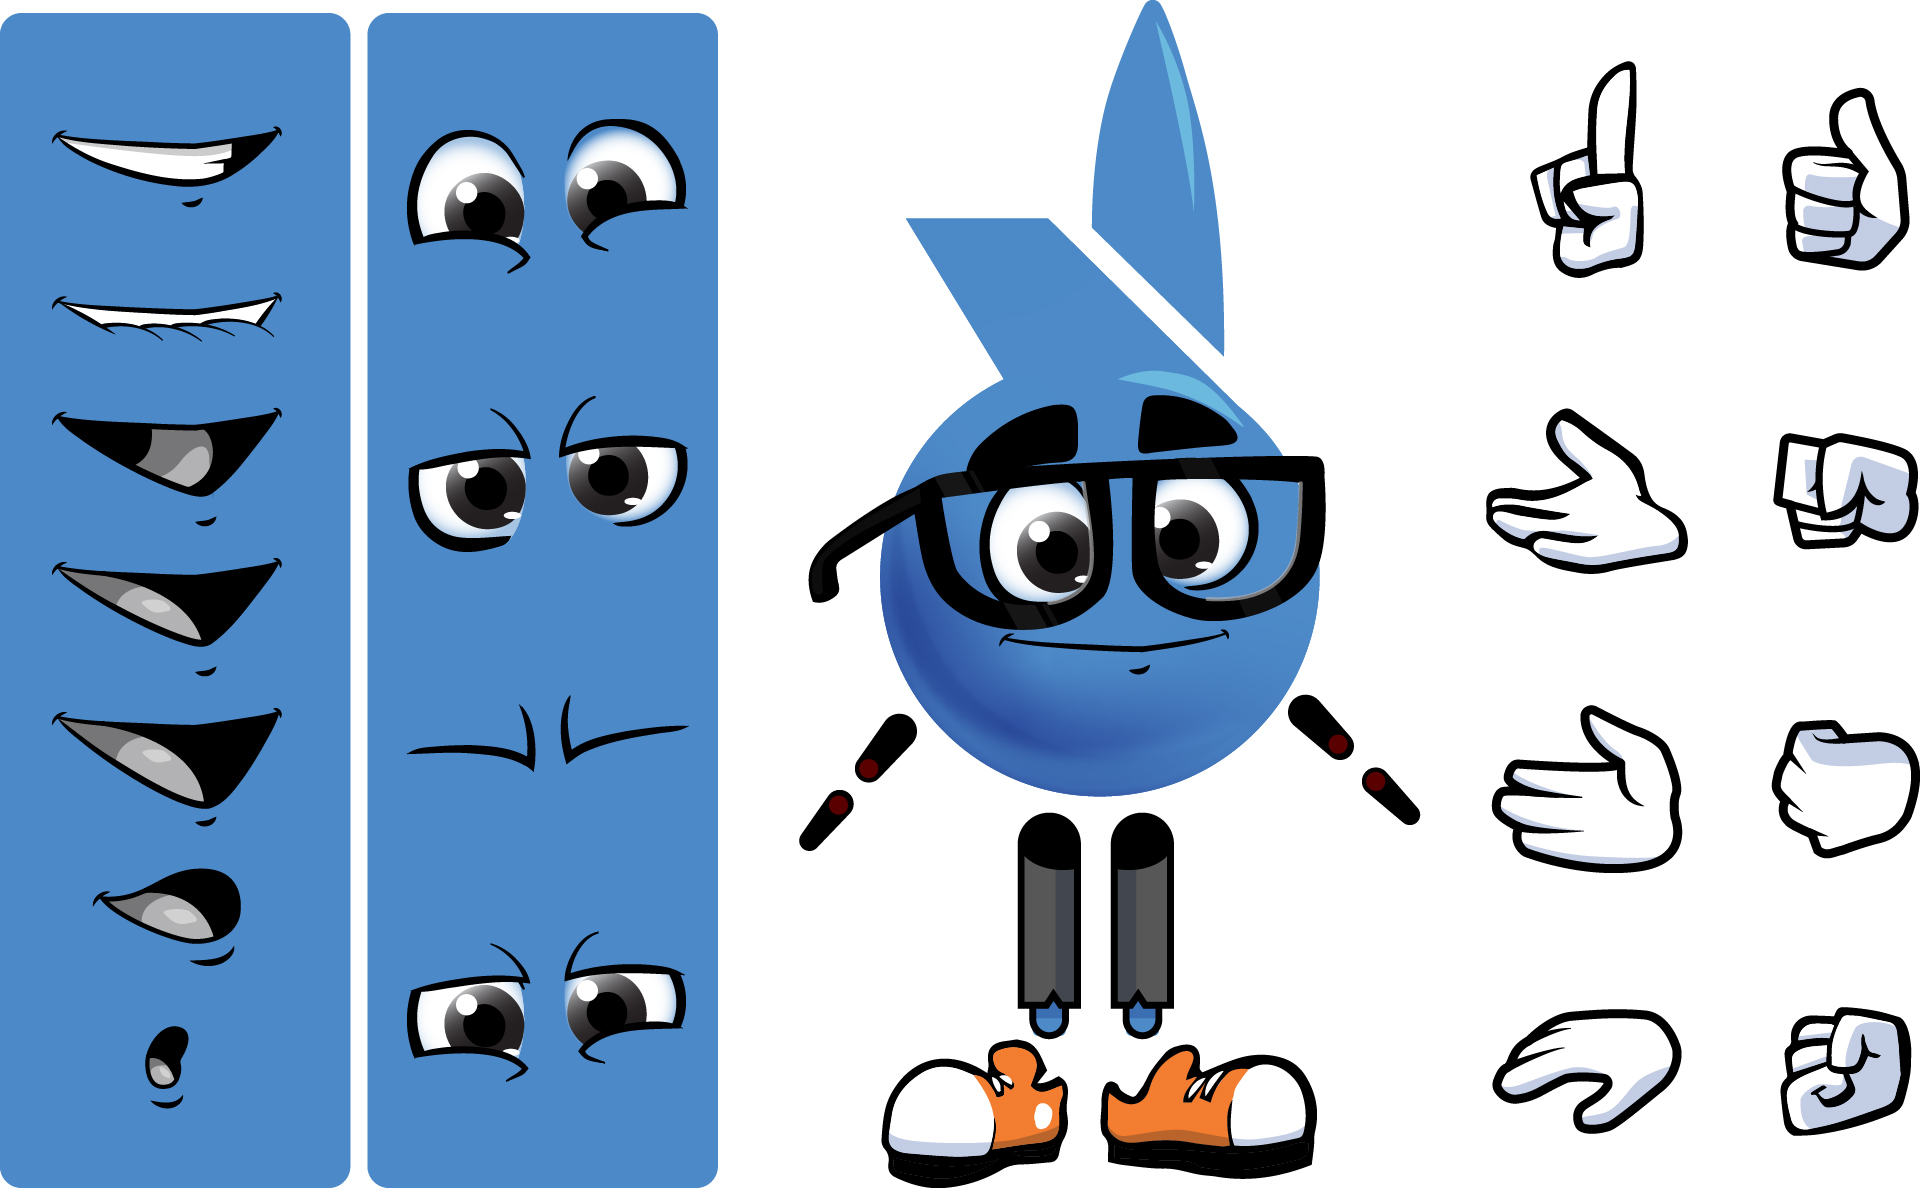 Deconstructed Diagram of Different Assets For Animated Stobi Character with Multiple Hand and Mouth Shapes